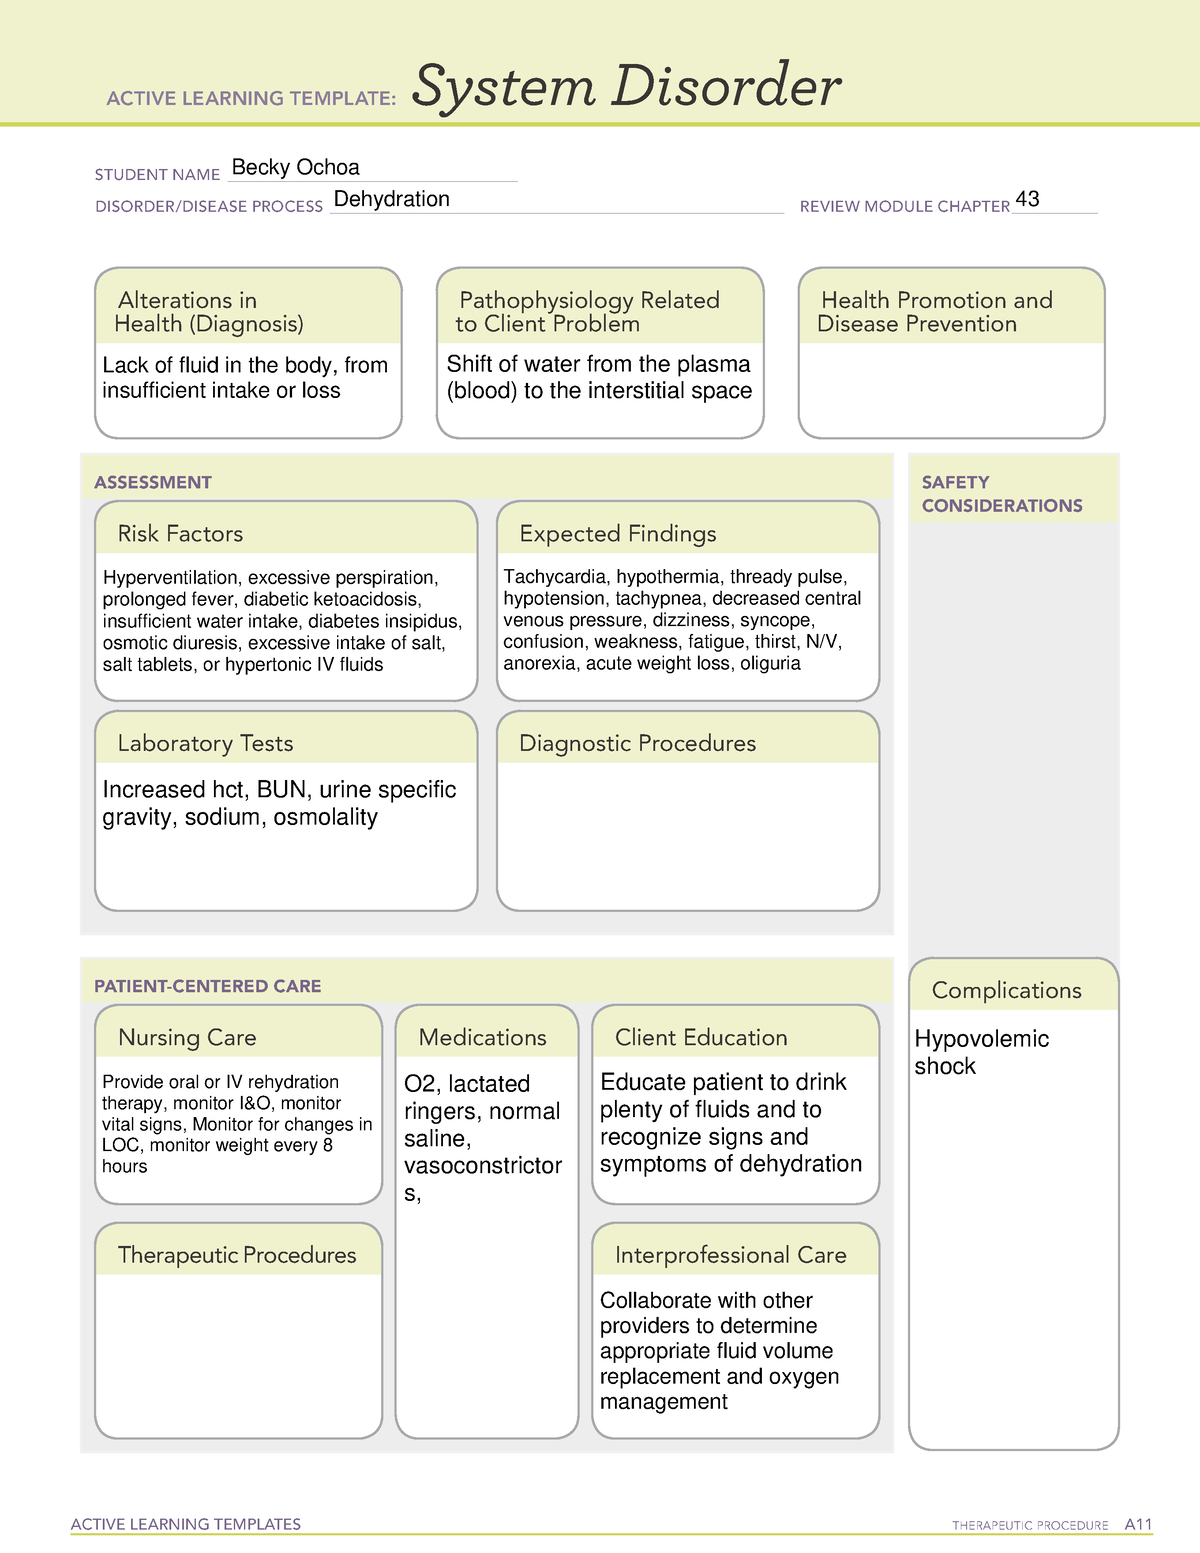 ati-system-disorder-template-dehydration-active-learning-templates-therapeutic-procedure-a